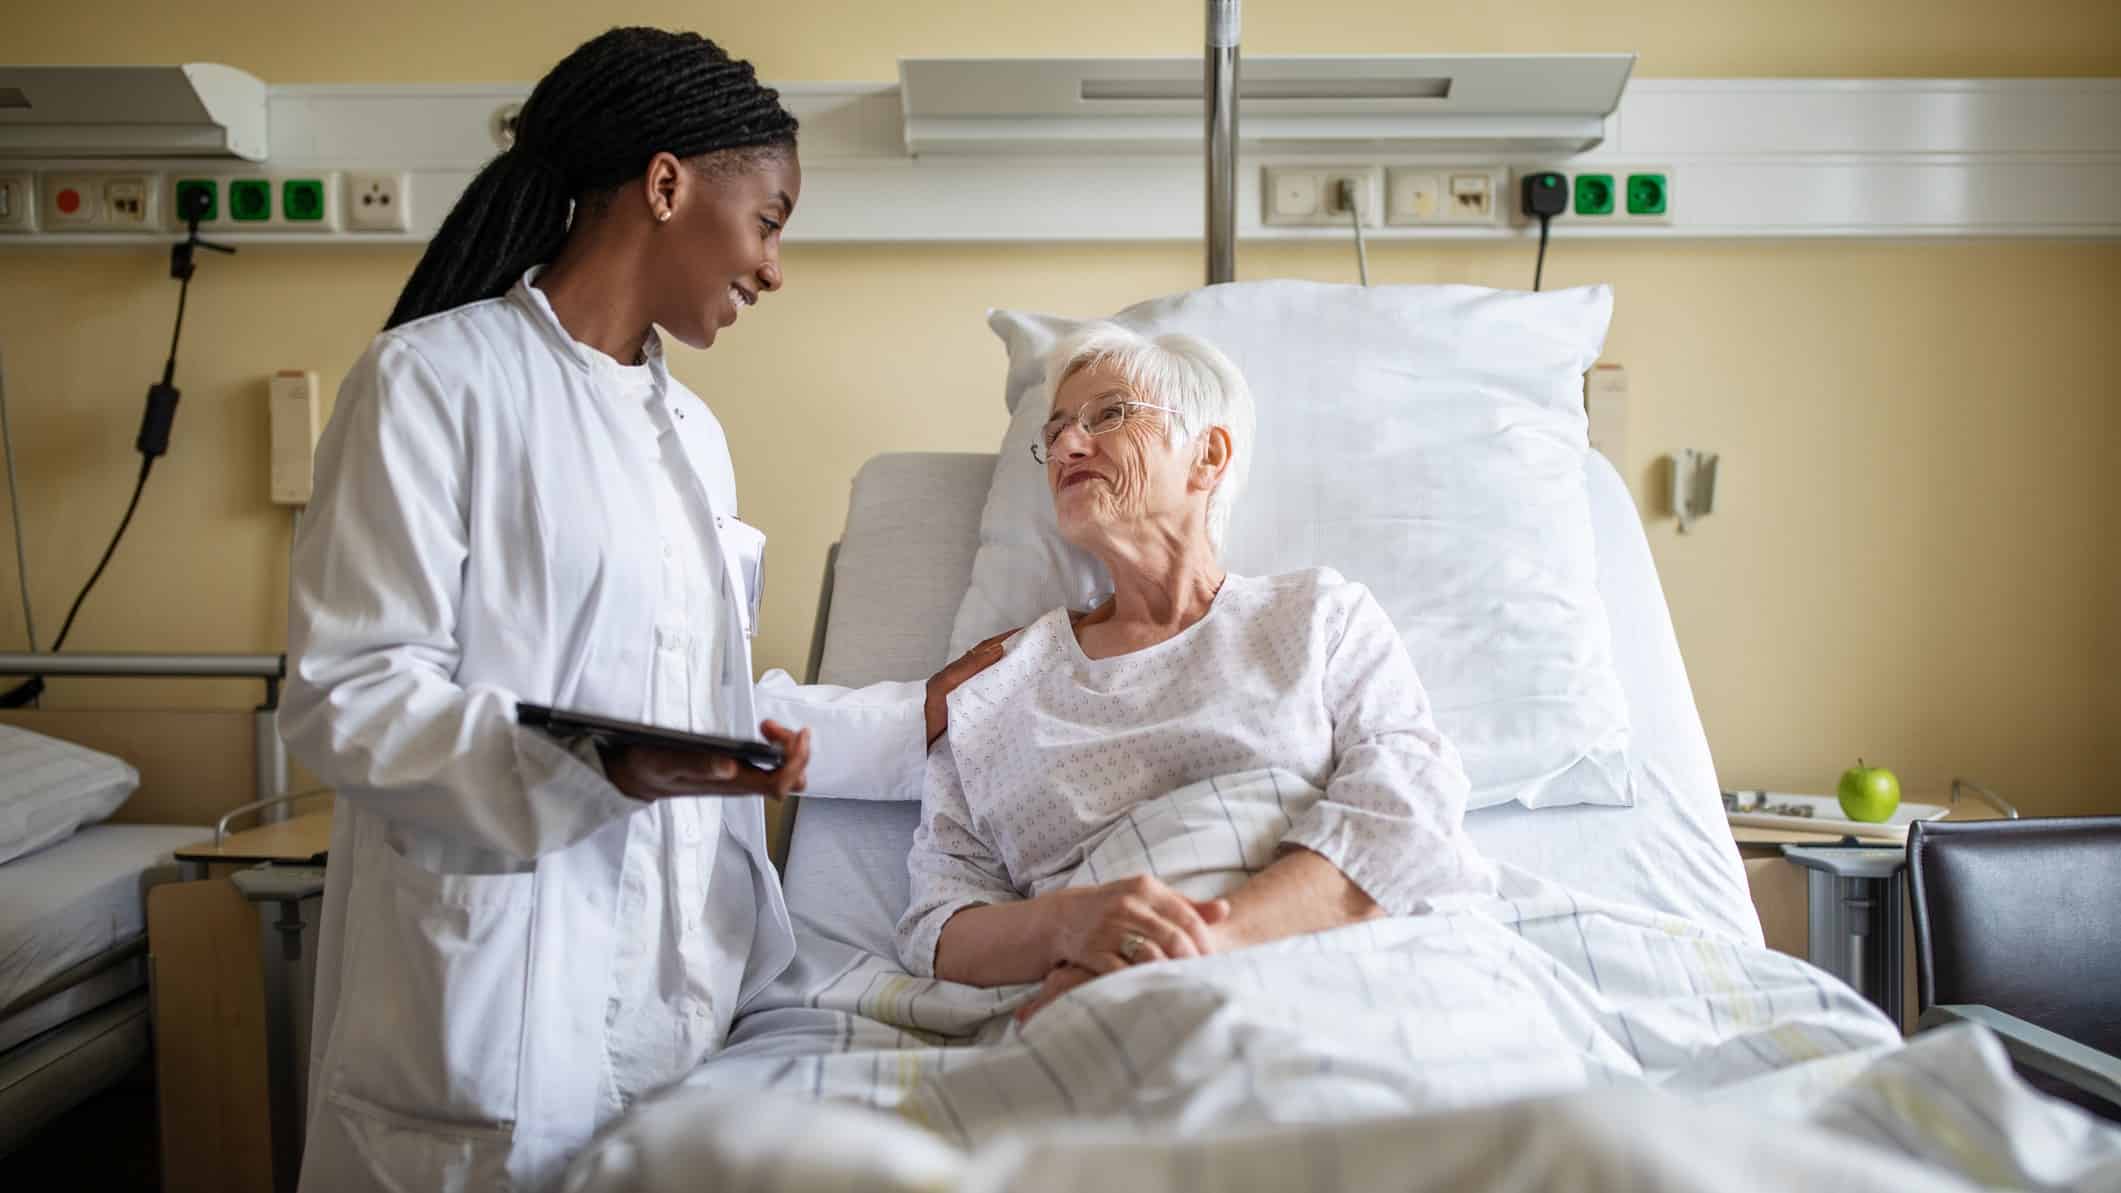 a patient in a hospital bed is reassured by a doctor at her bedside with the doctor placing a hand on the paient's shoulder. They are both smiling.